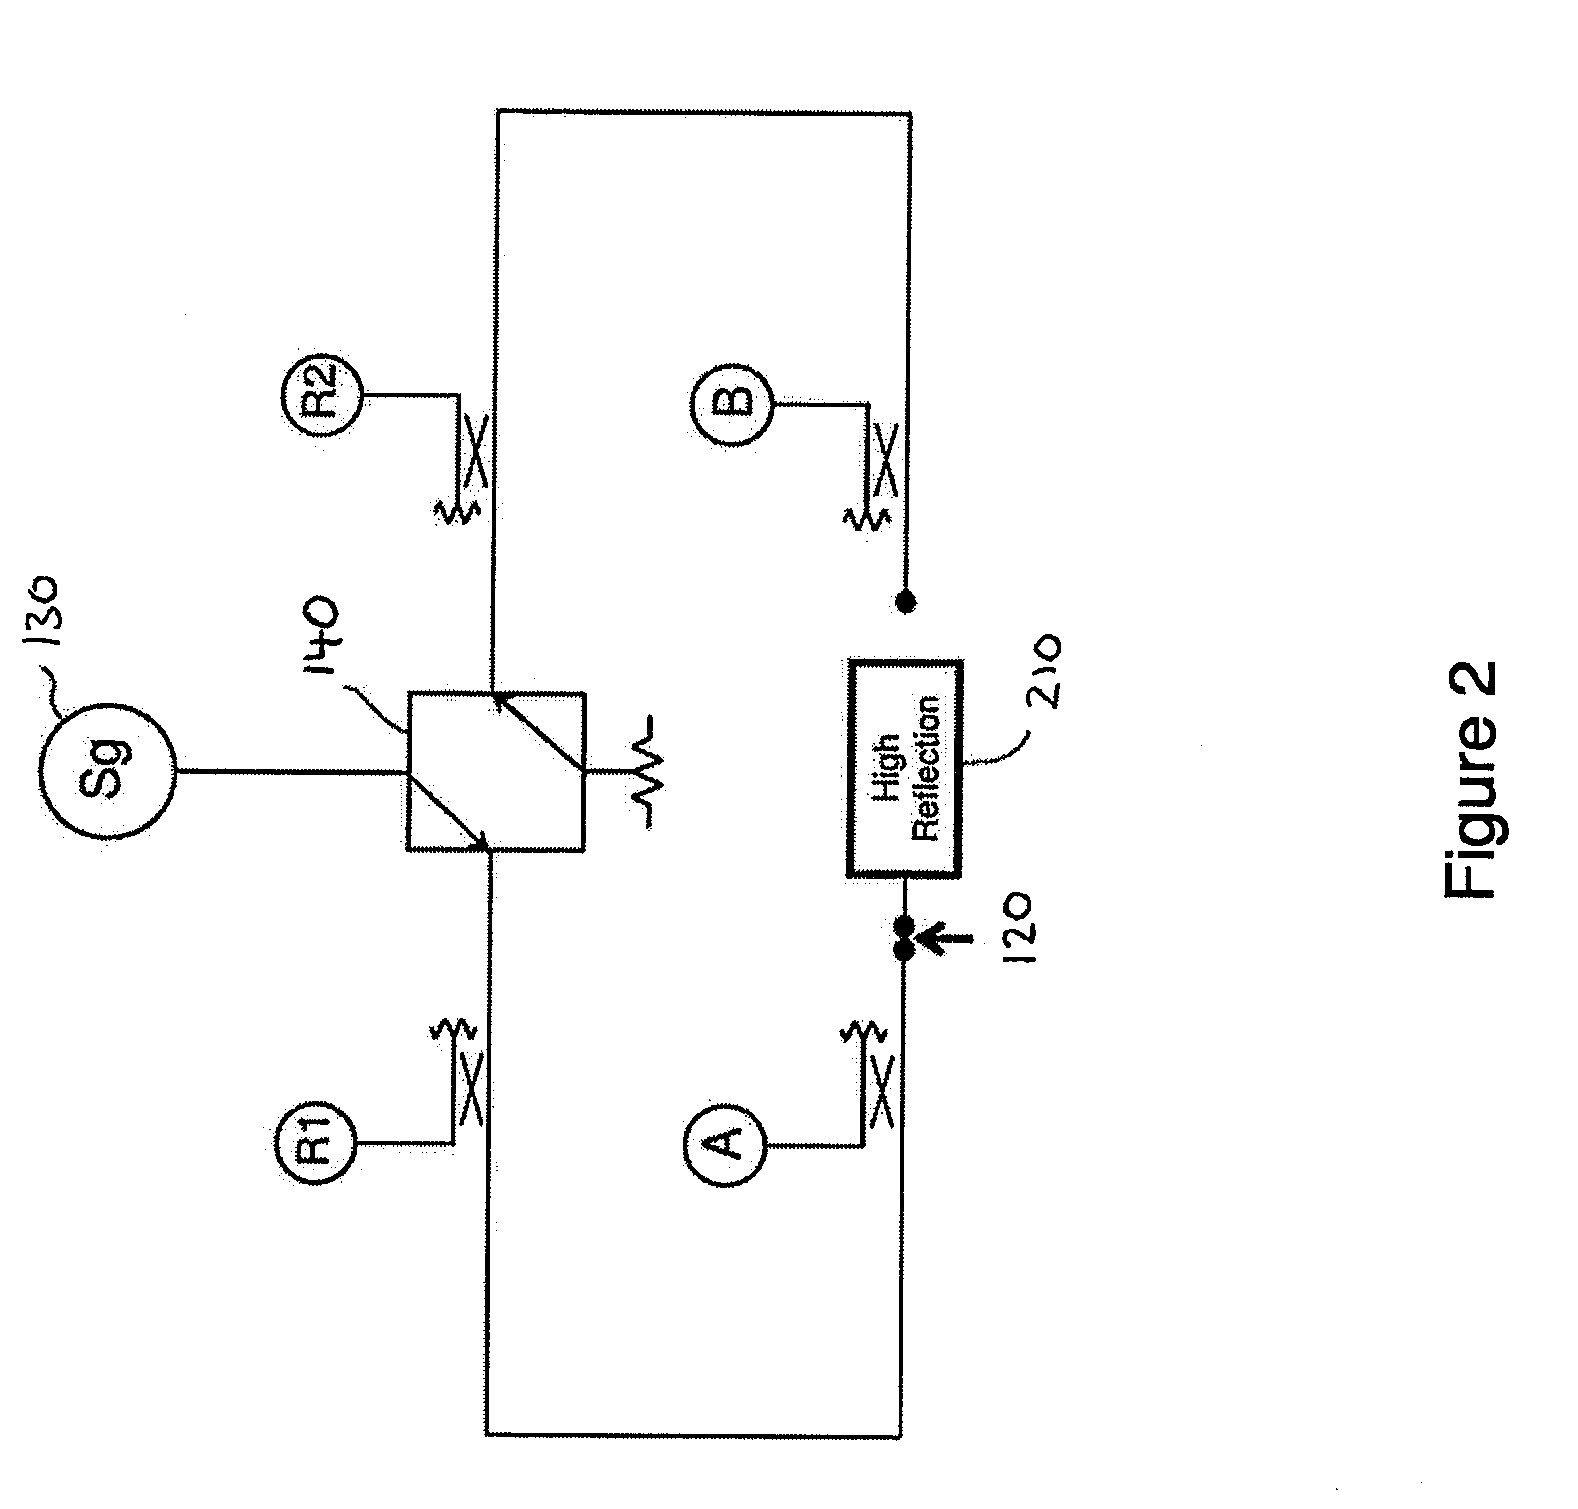 Method and apparatus for calibrating a test system for measuring a device under test